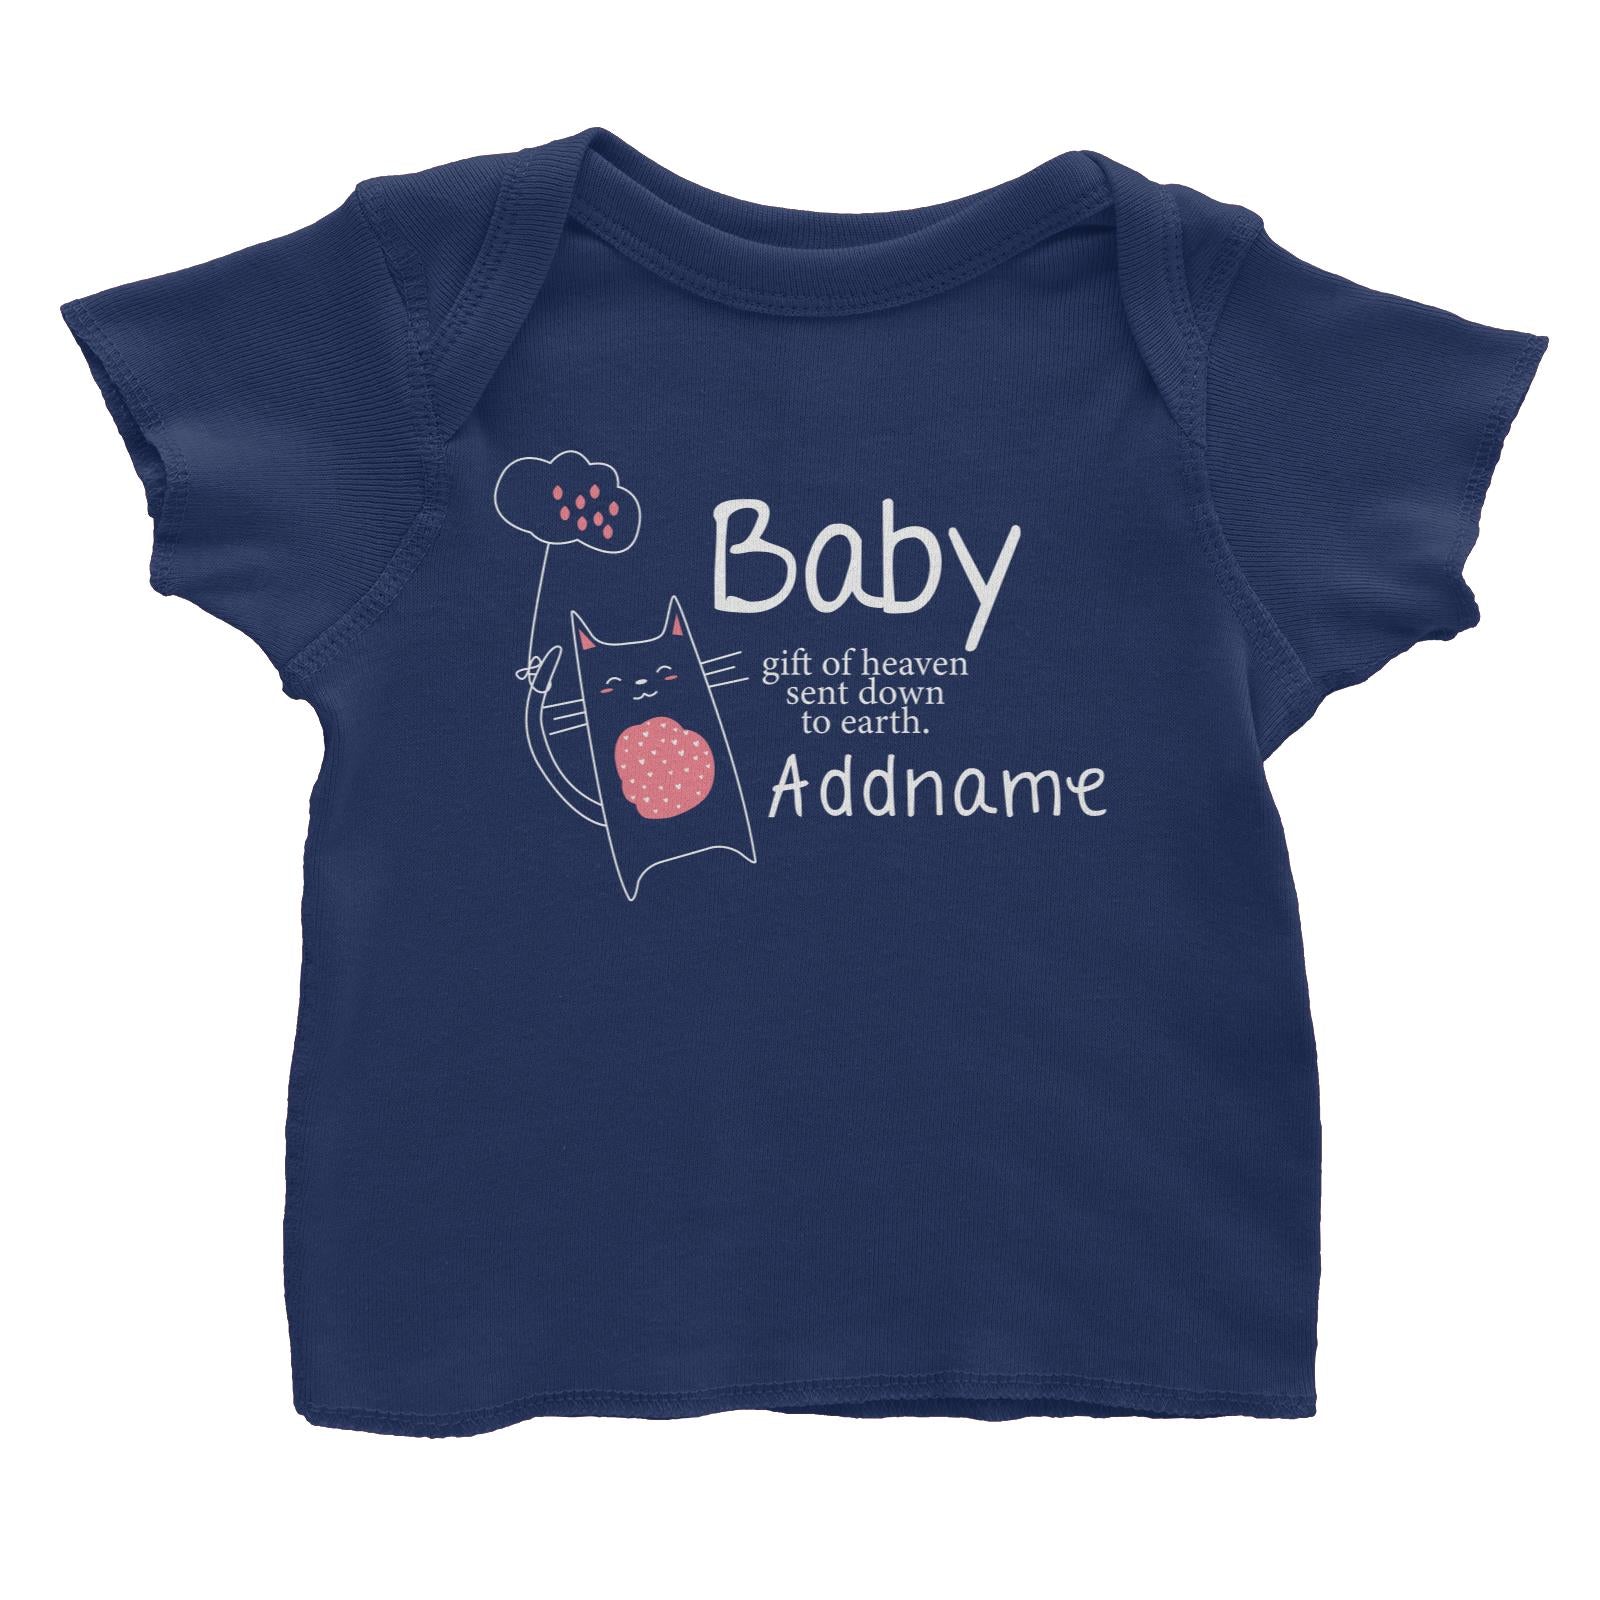 Cute Animals and Friends Series 2 Cat Baby Gift of Heaven sent down to earth Addname Baby T-Shirt